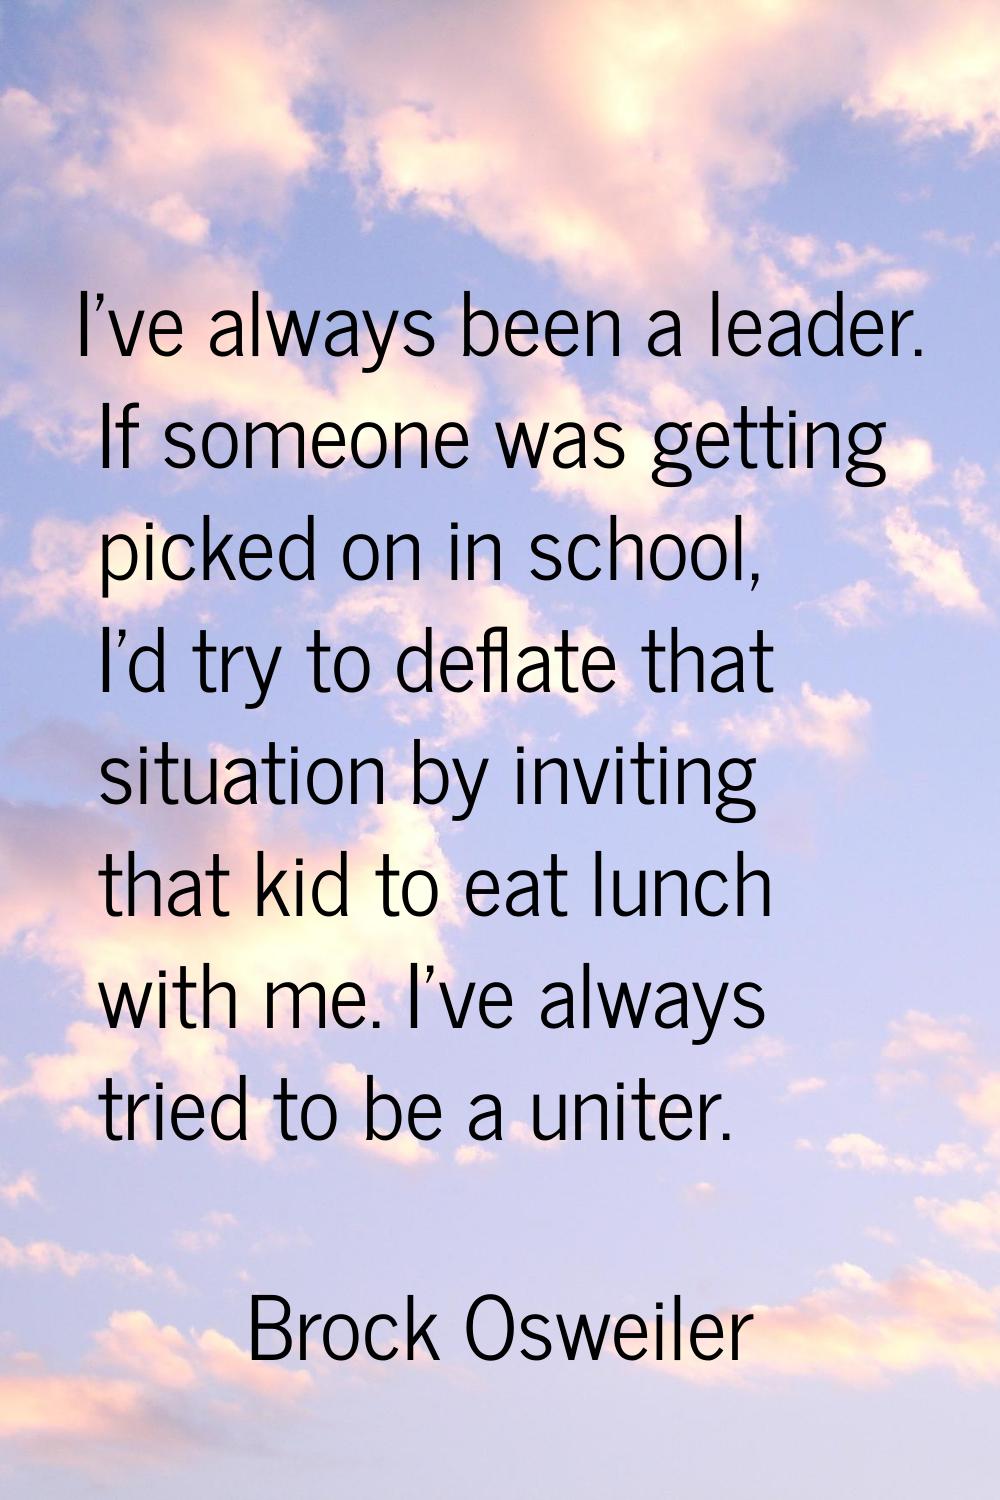 I've always been a leader. If someone was getting picked on in school, I'd try to deflate that situ